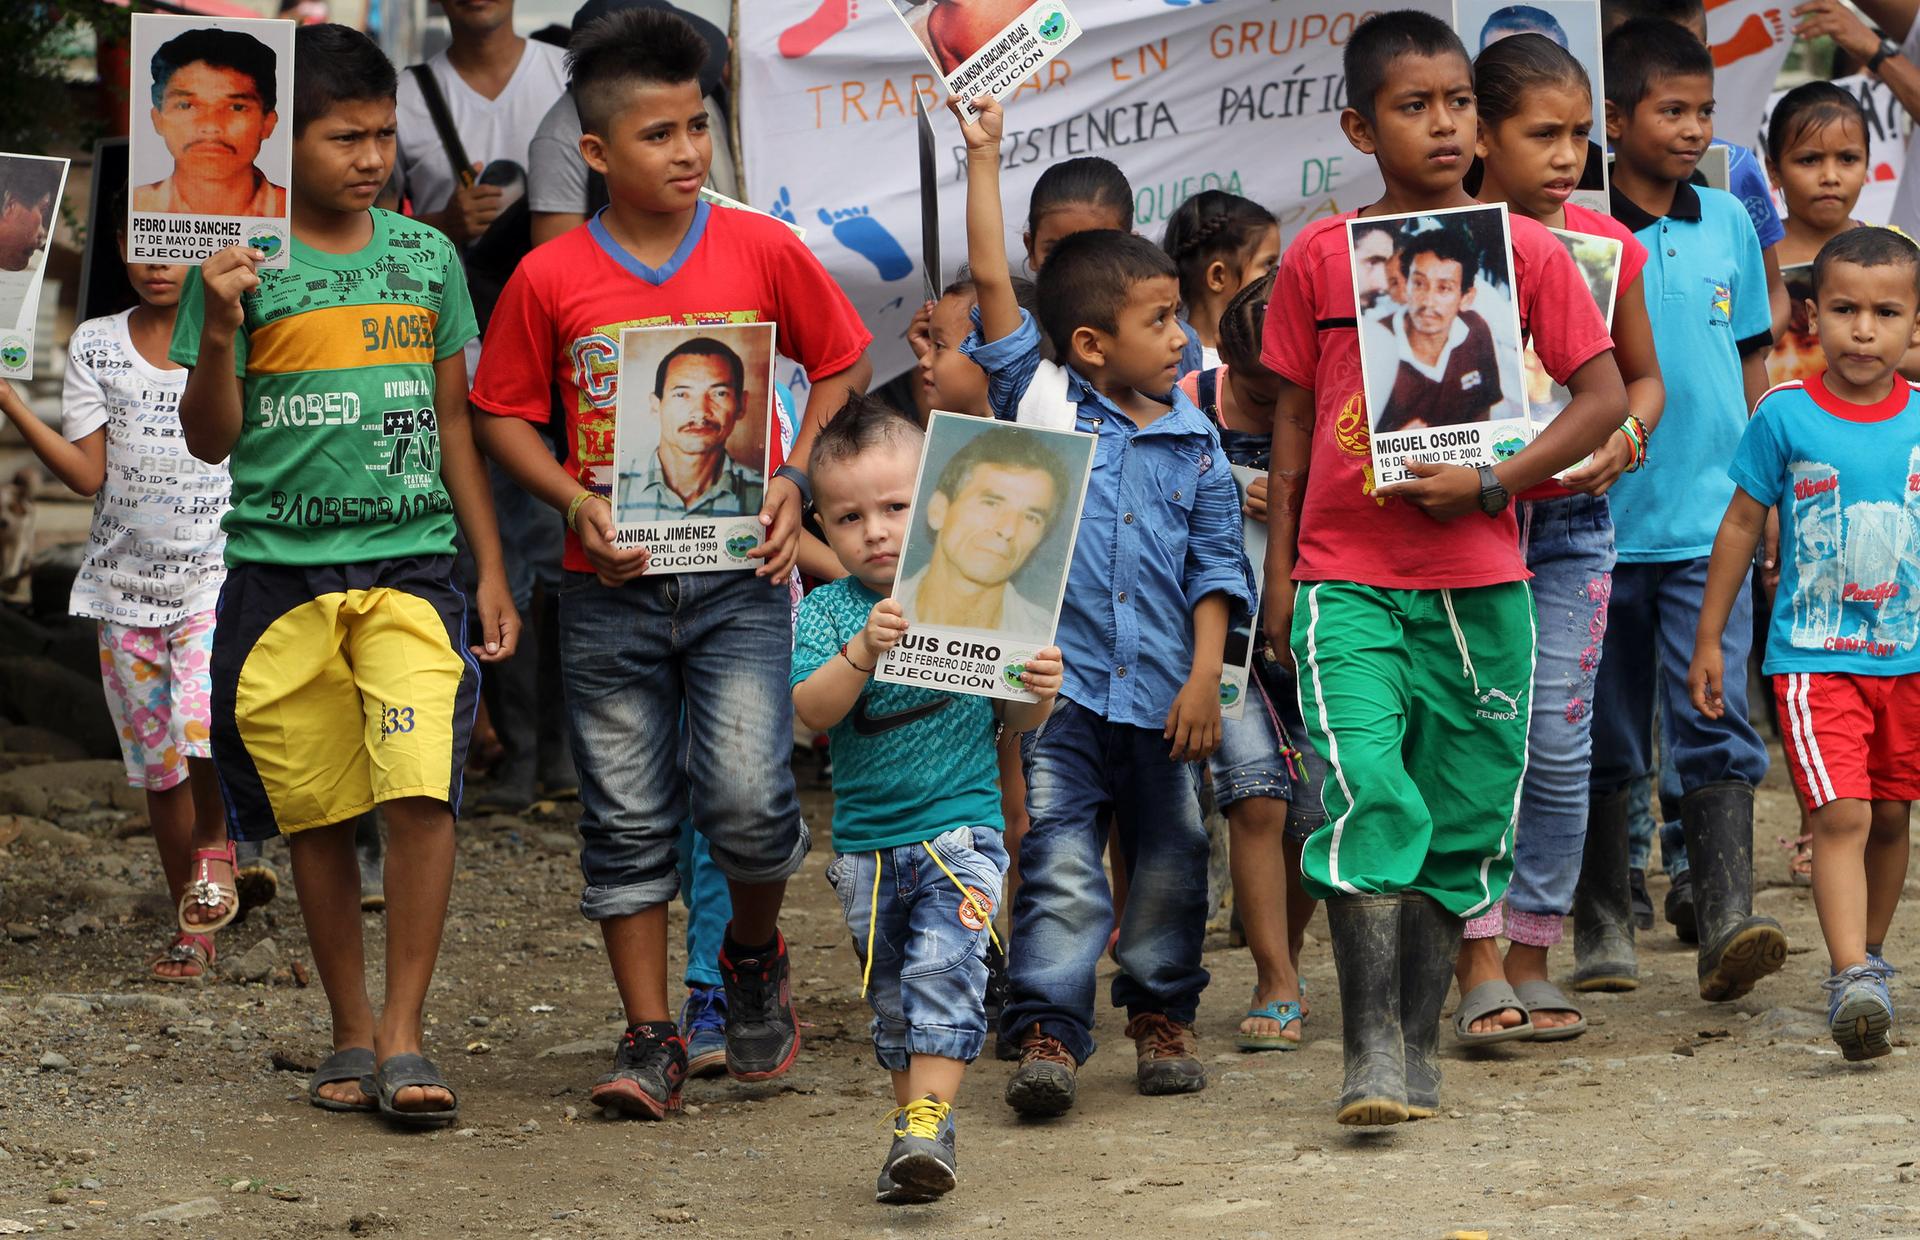 Kids carrying signs showing faces of massacred